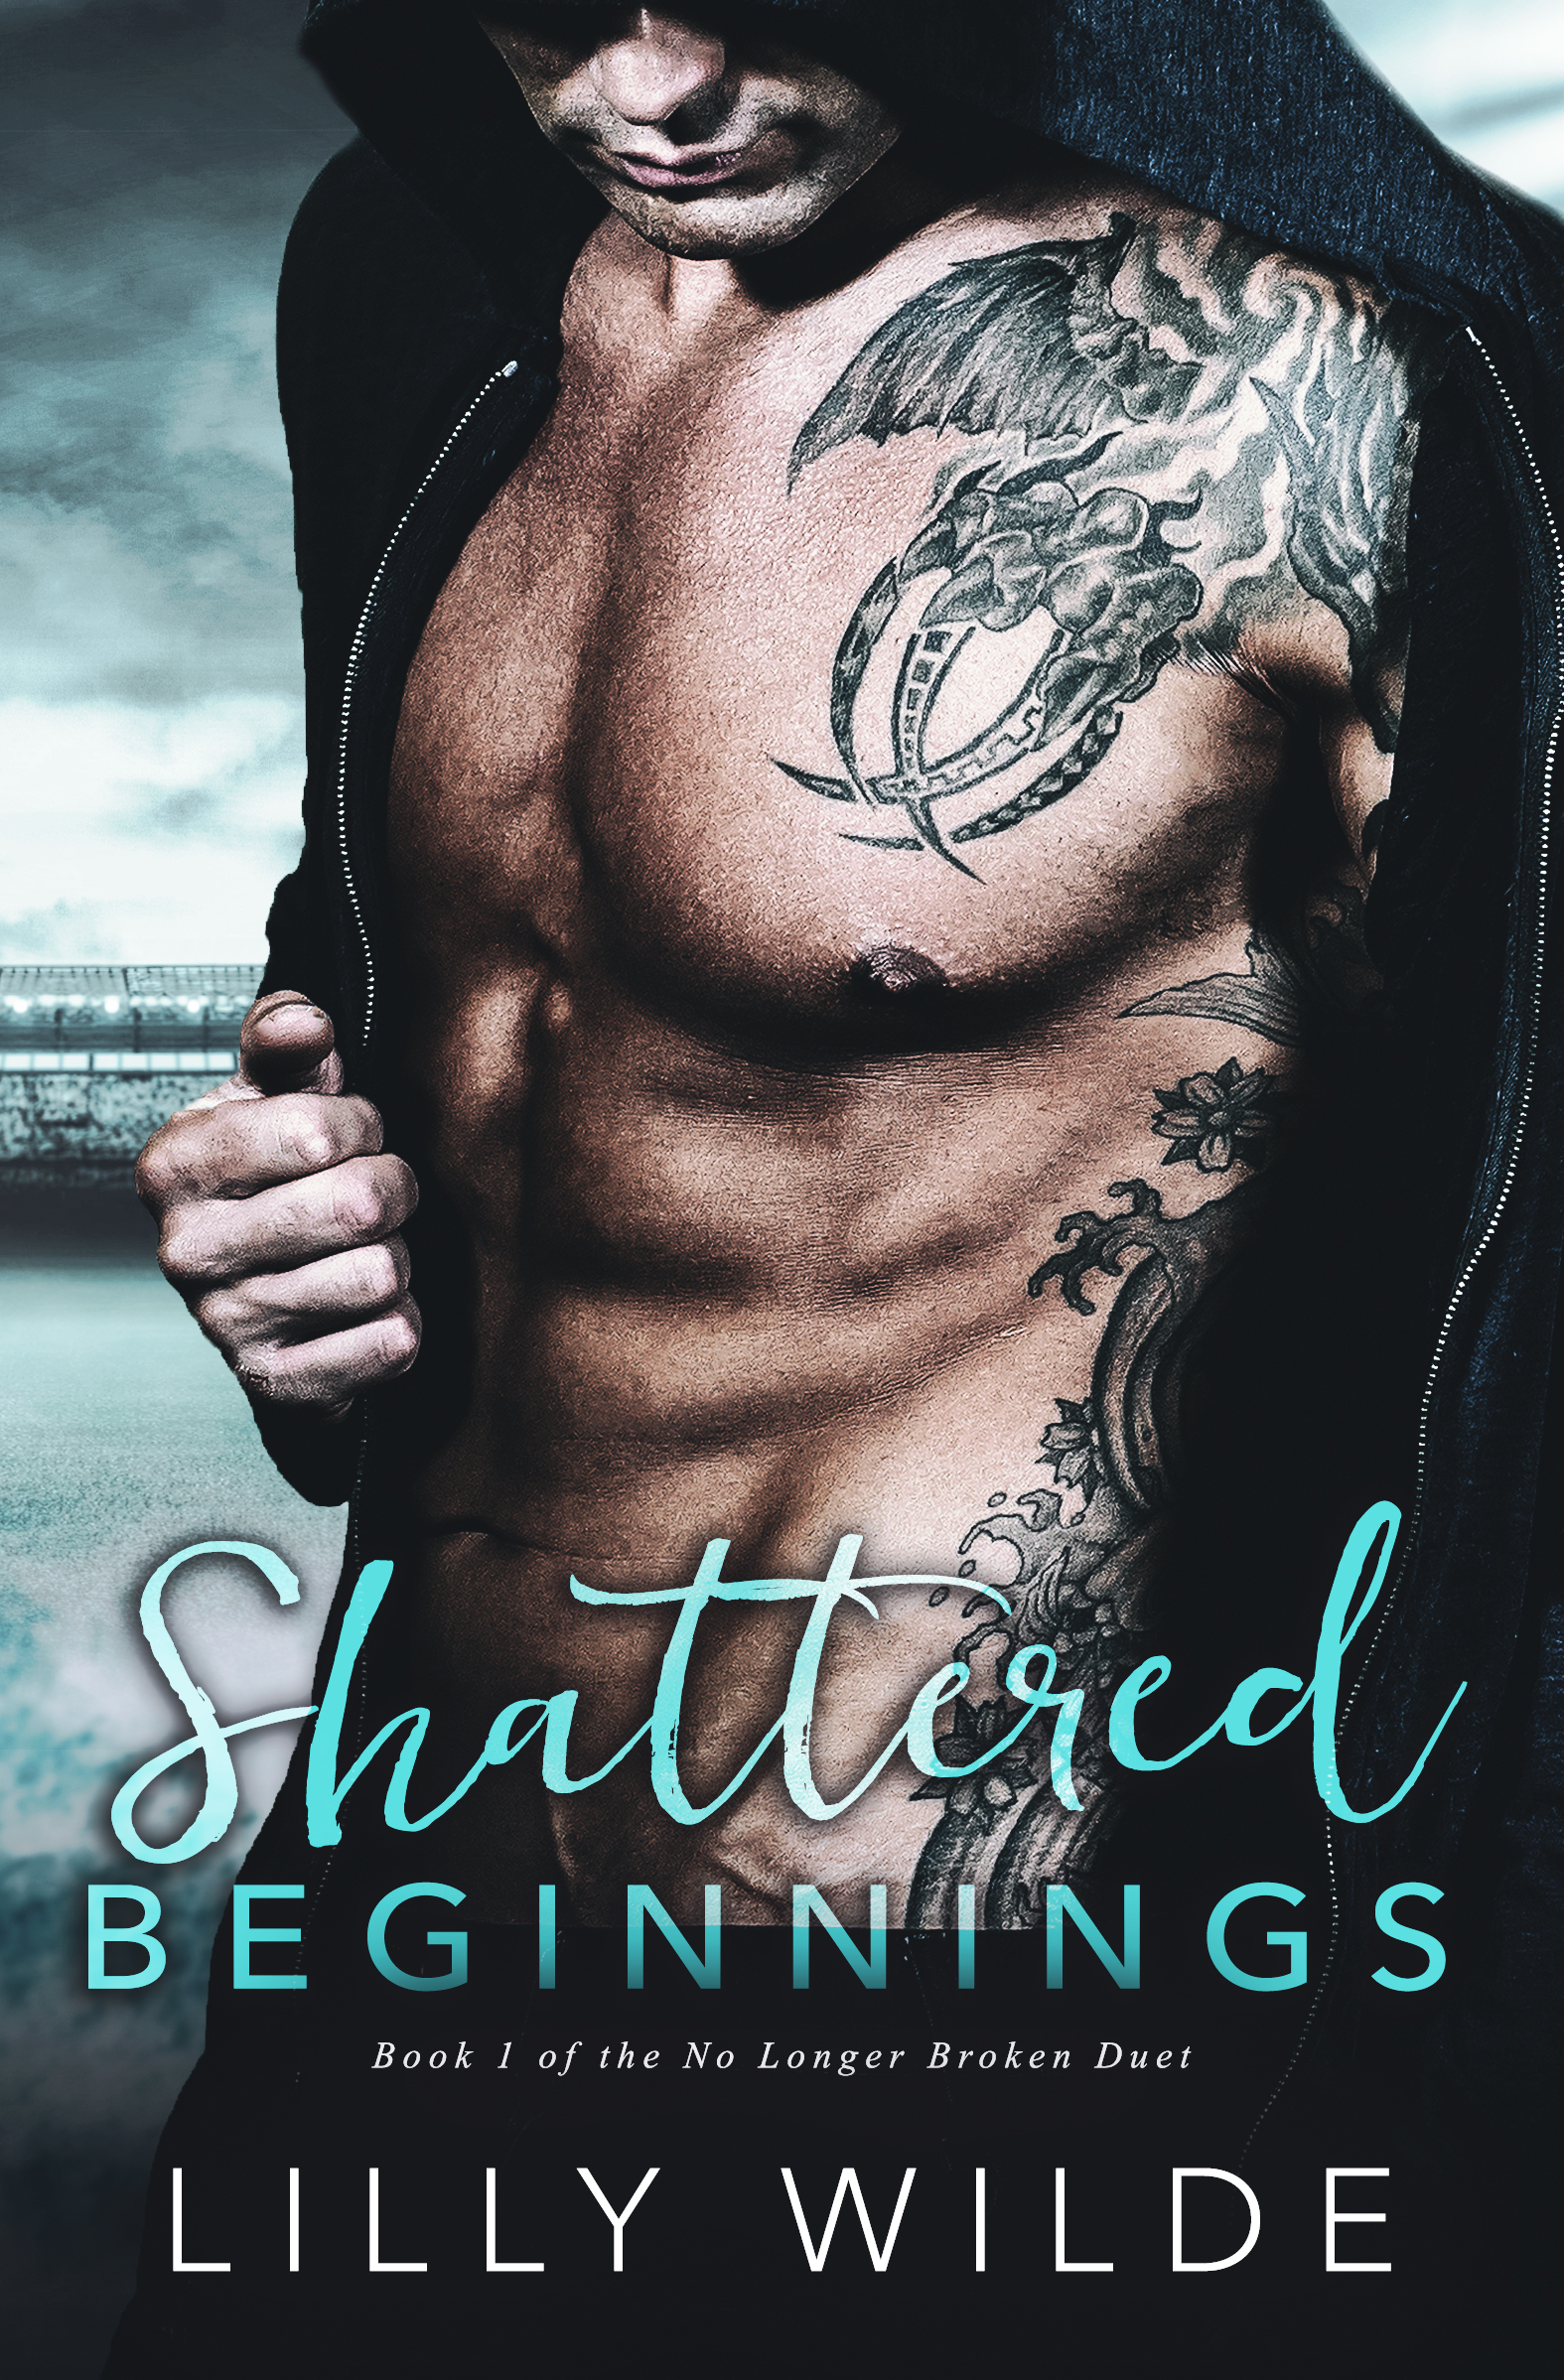 Shattered Beginnings by Lilly Wilde [Release Blitz]